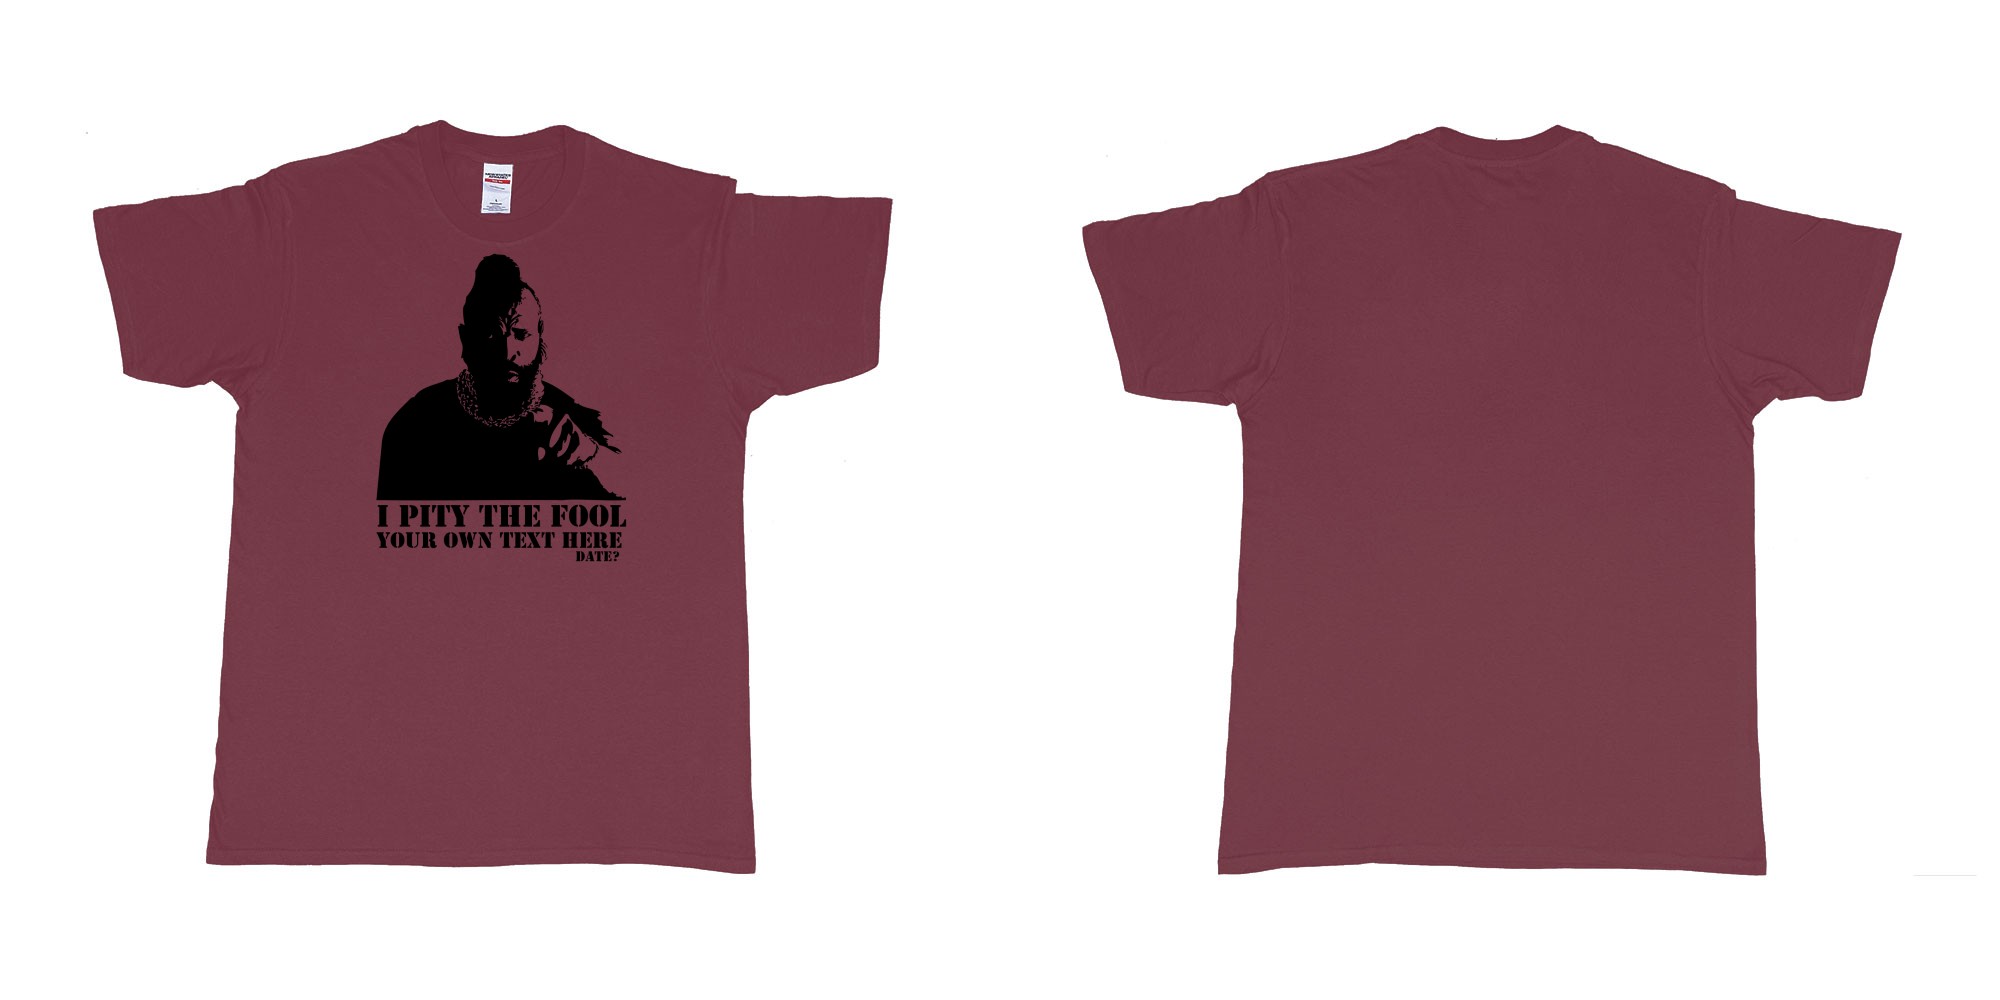 Custom tshirt design I pity the fool in fabric color marron choice your own text made in Bali by The Pirate Way